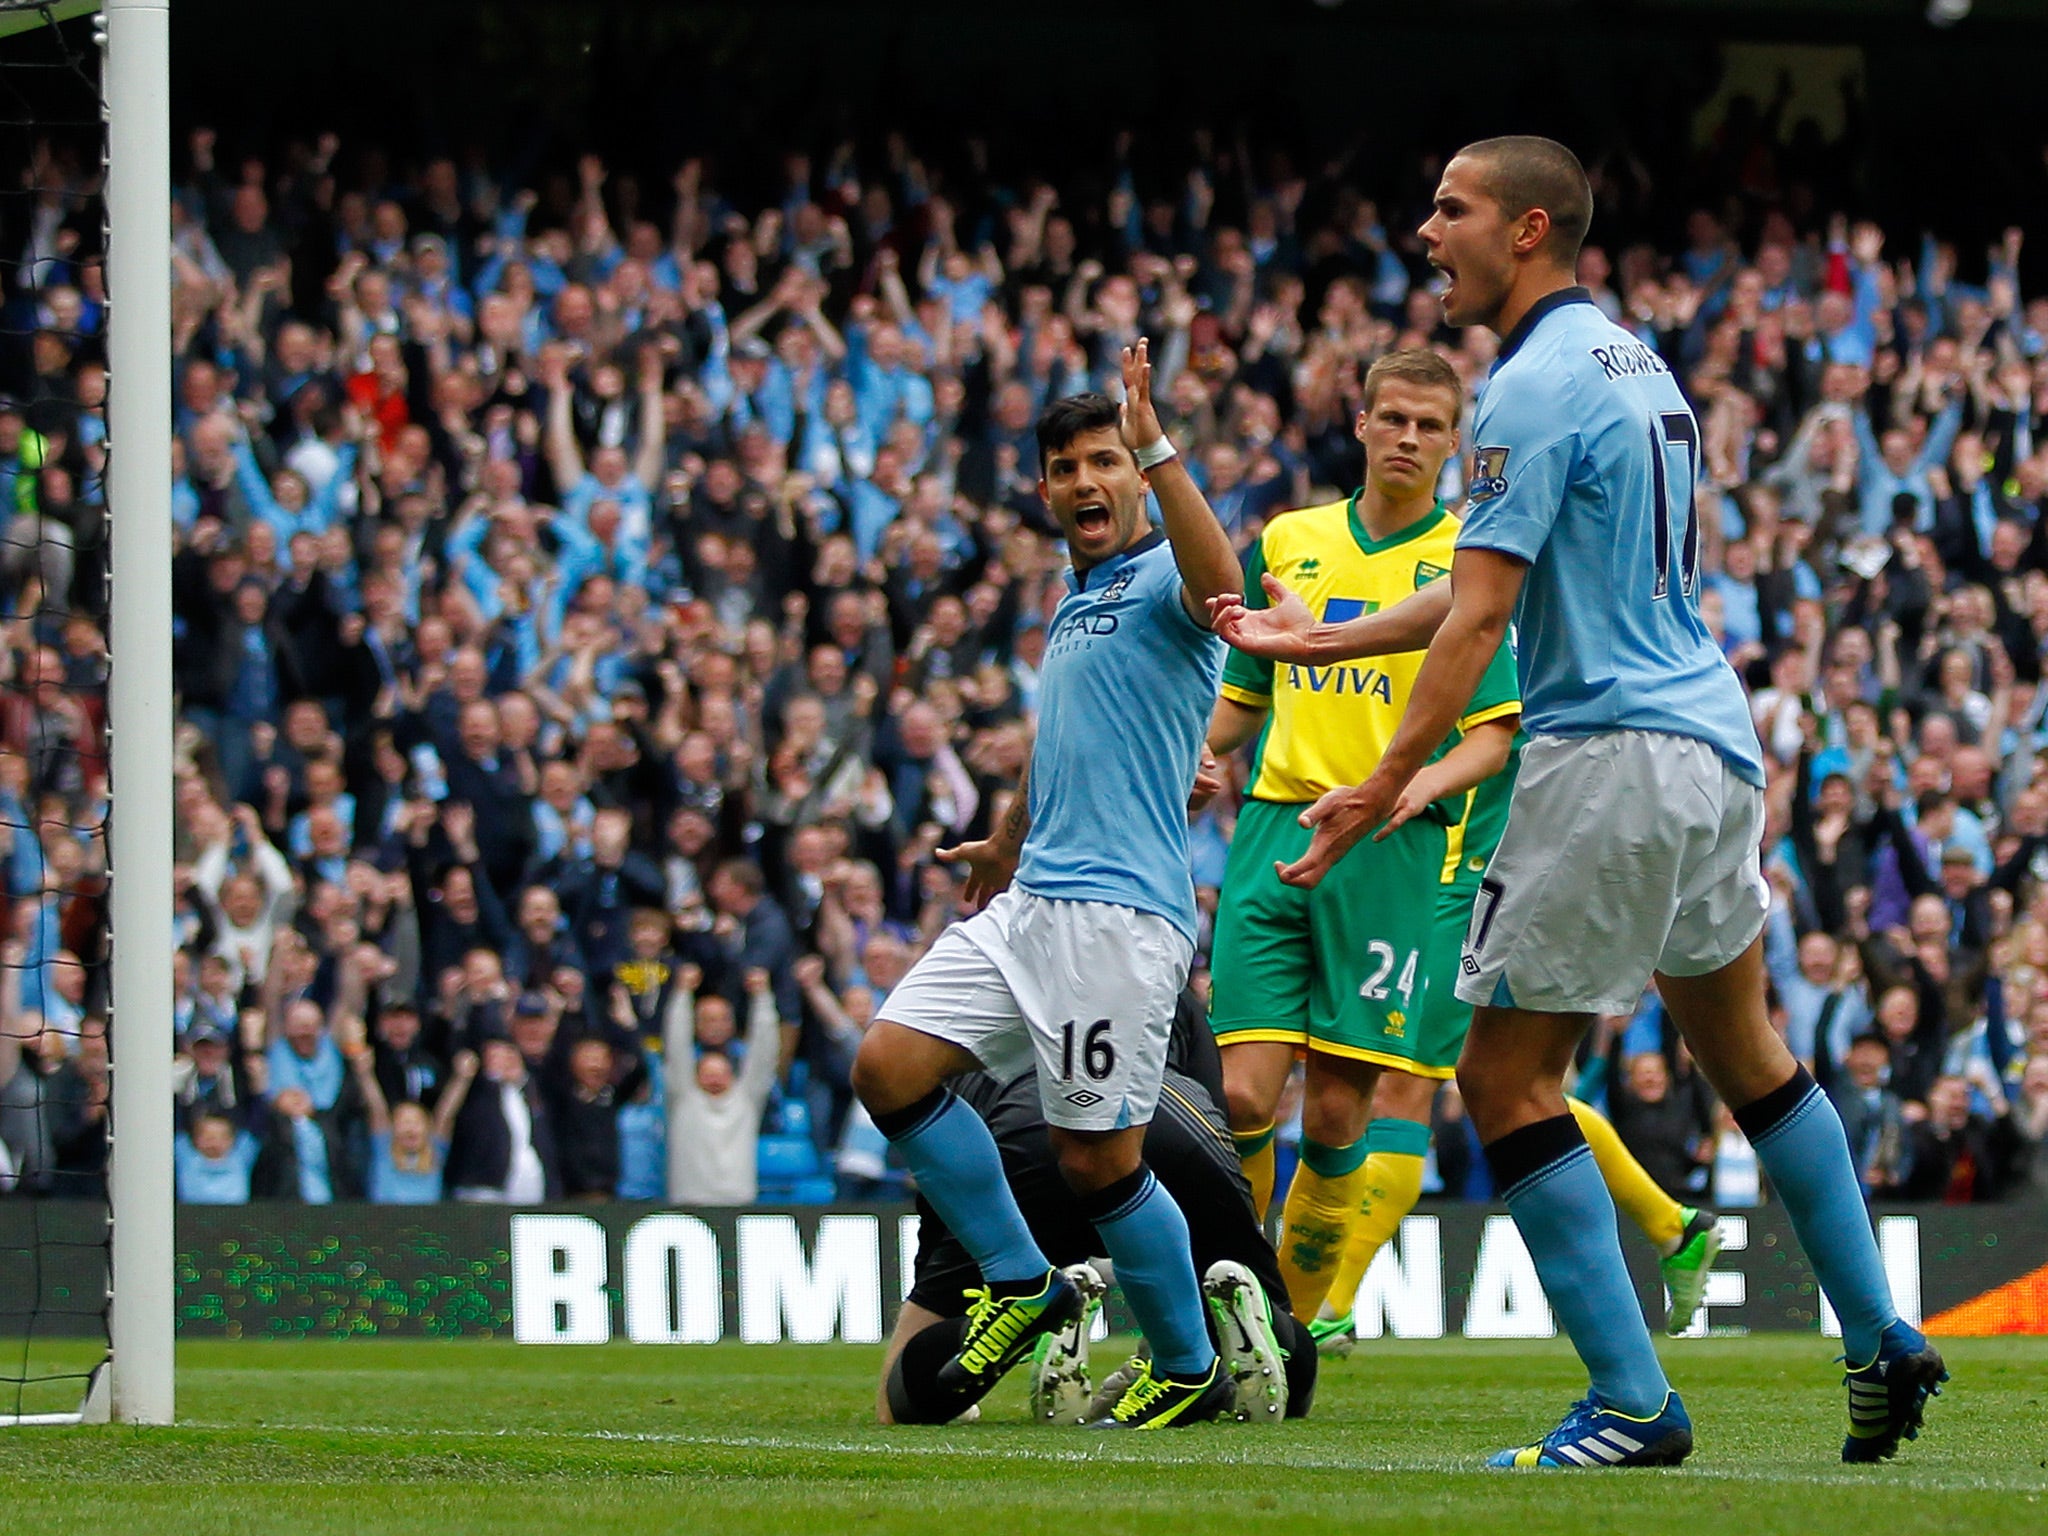 Jack Rodwell celebrates after scoring for Manchester City against Norwich